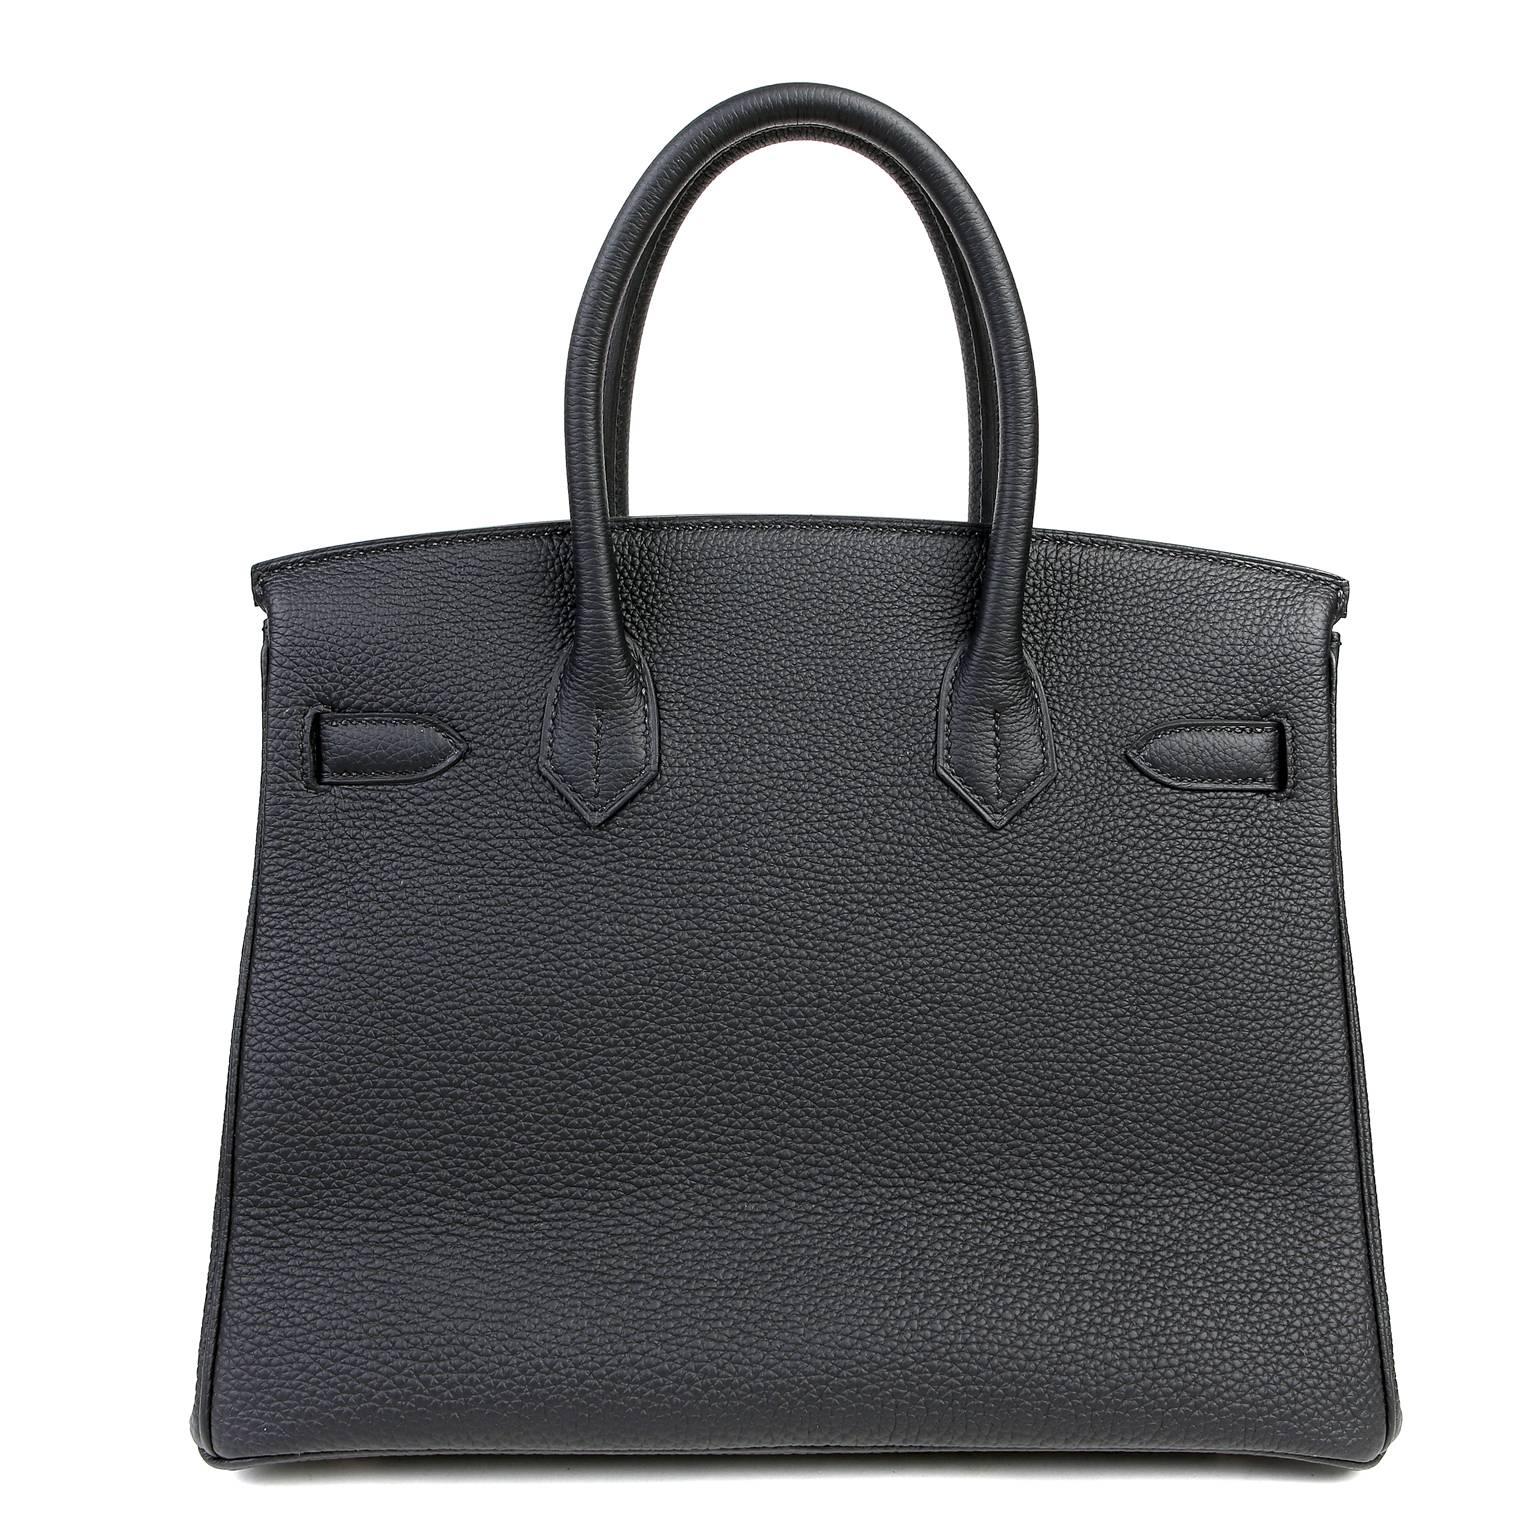 This Authentic Hermès 30 cm Black Togo Birkin Bag is in pristine unworn condition with the plastic intact on the hardware.  Waitlists exceeding a year are commonplace for the intensely coveted classic Black leather Birkin. Each piece is hand